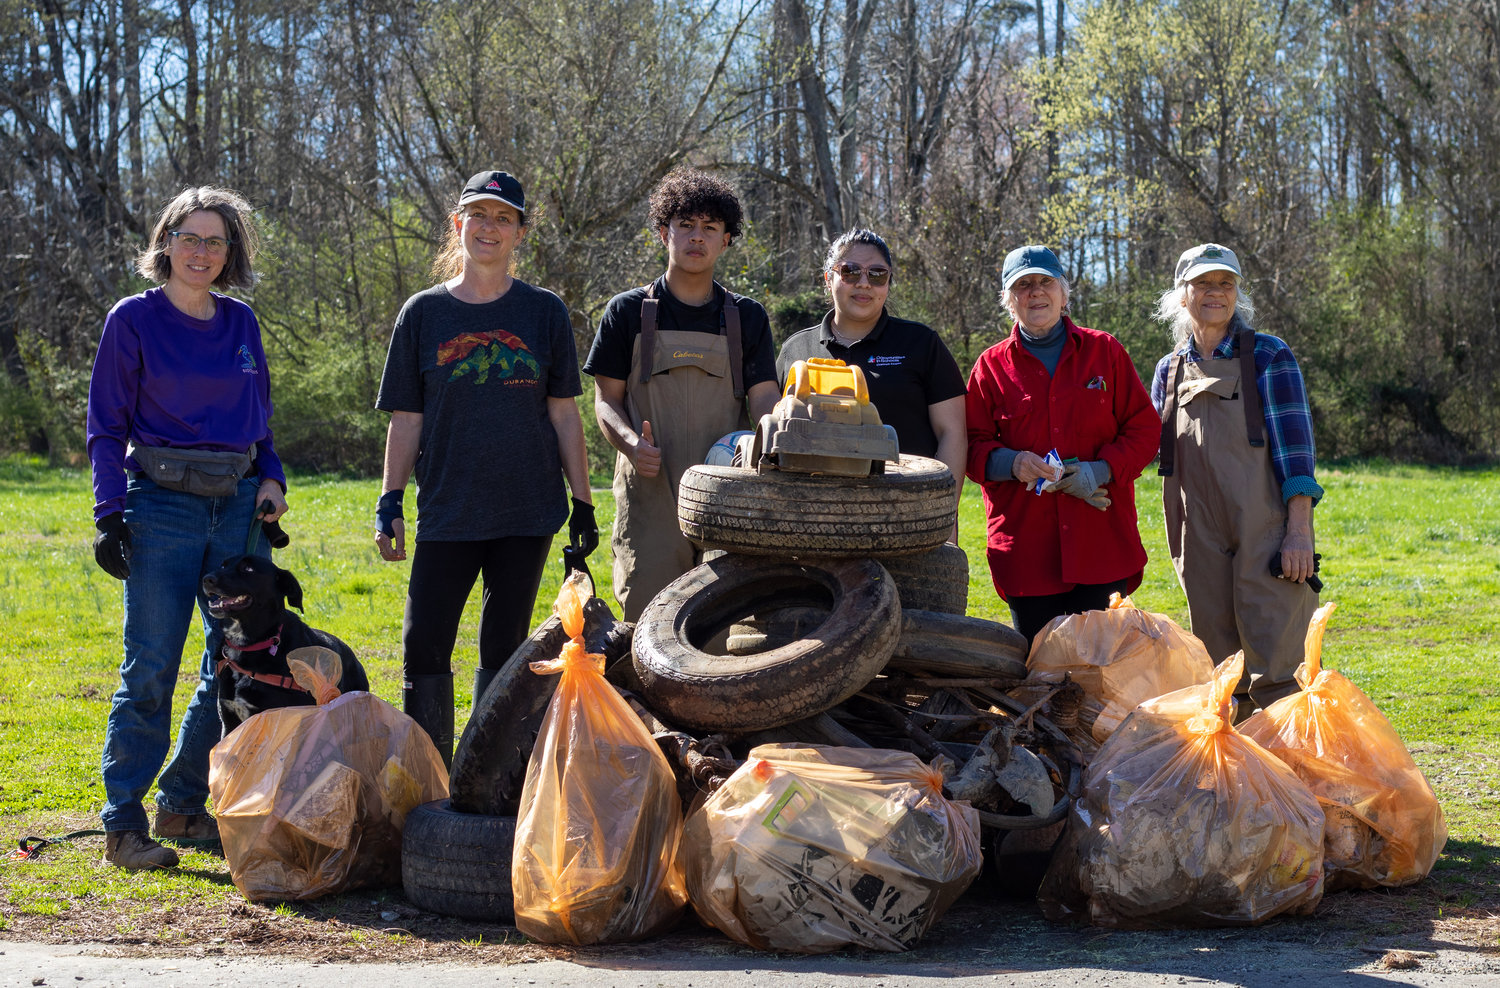 Bags of trash, tires, soccer balls, kids toys and even a bike were pulled out of Loves Creek by volunteers on Saturday during the trash clean up event.                      Shown from left: Catherine Deininger, Pascal Mittendorf, Marlon Interiano, Biesy Savilla, Diana Hales and Diana Montgomery